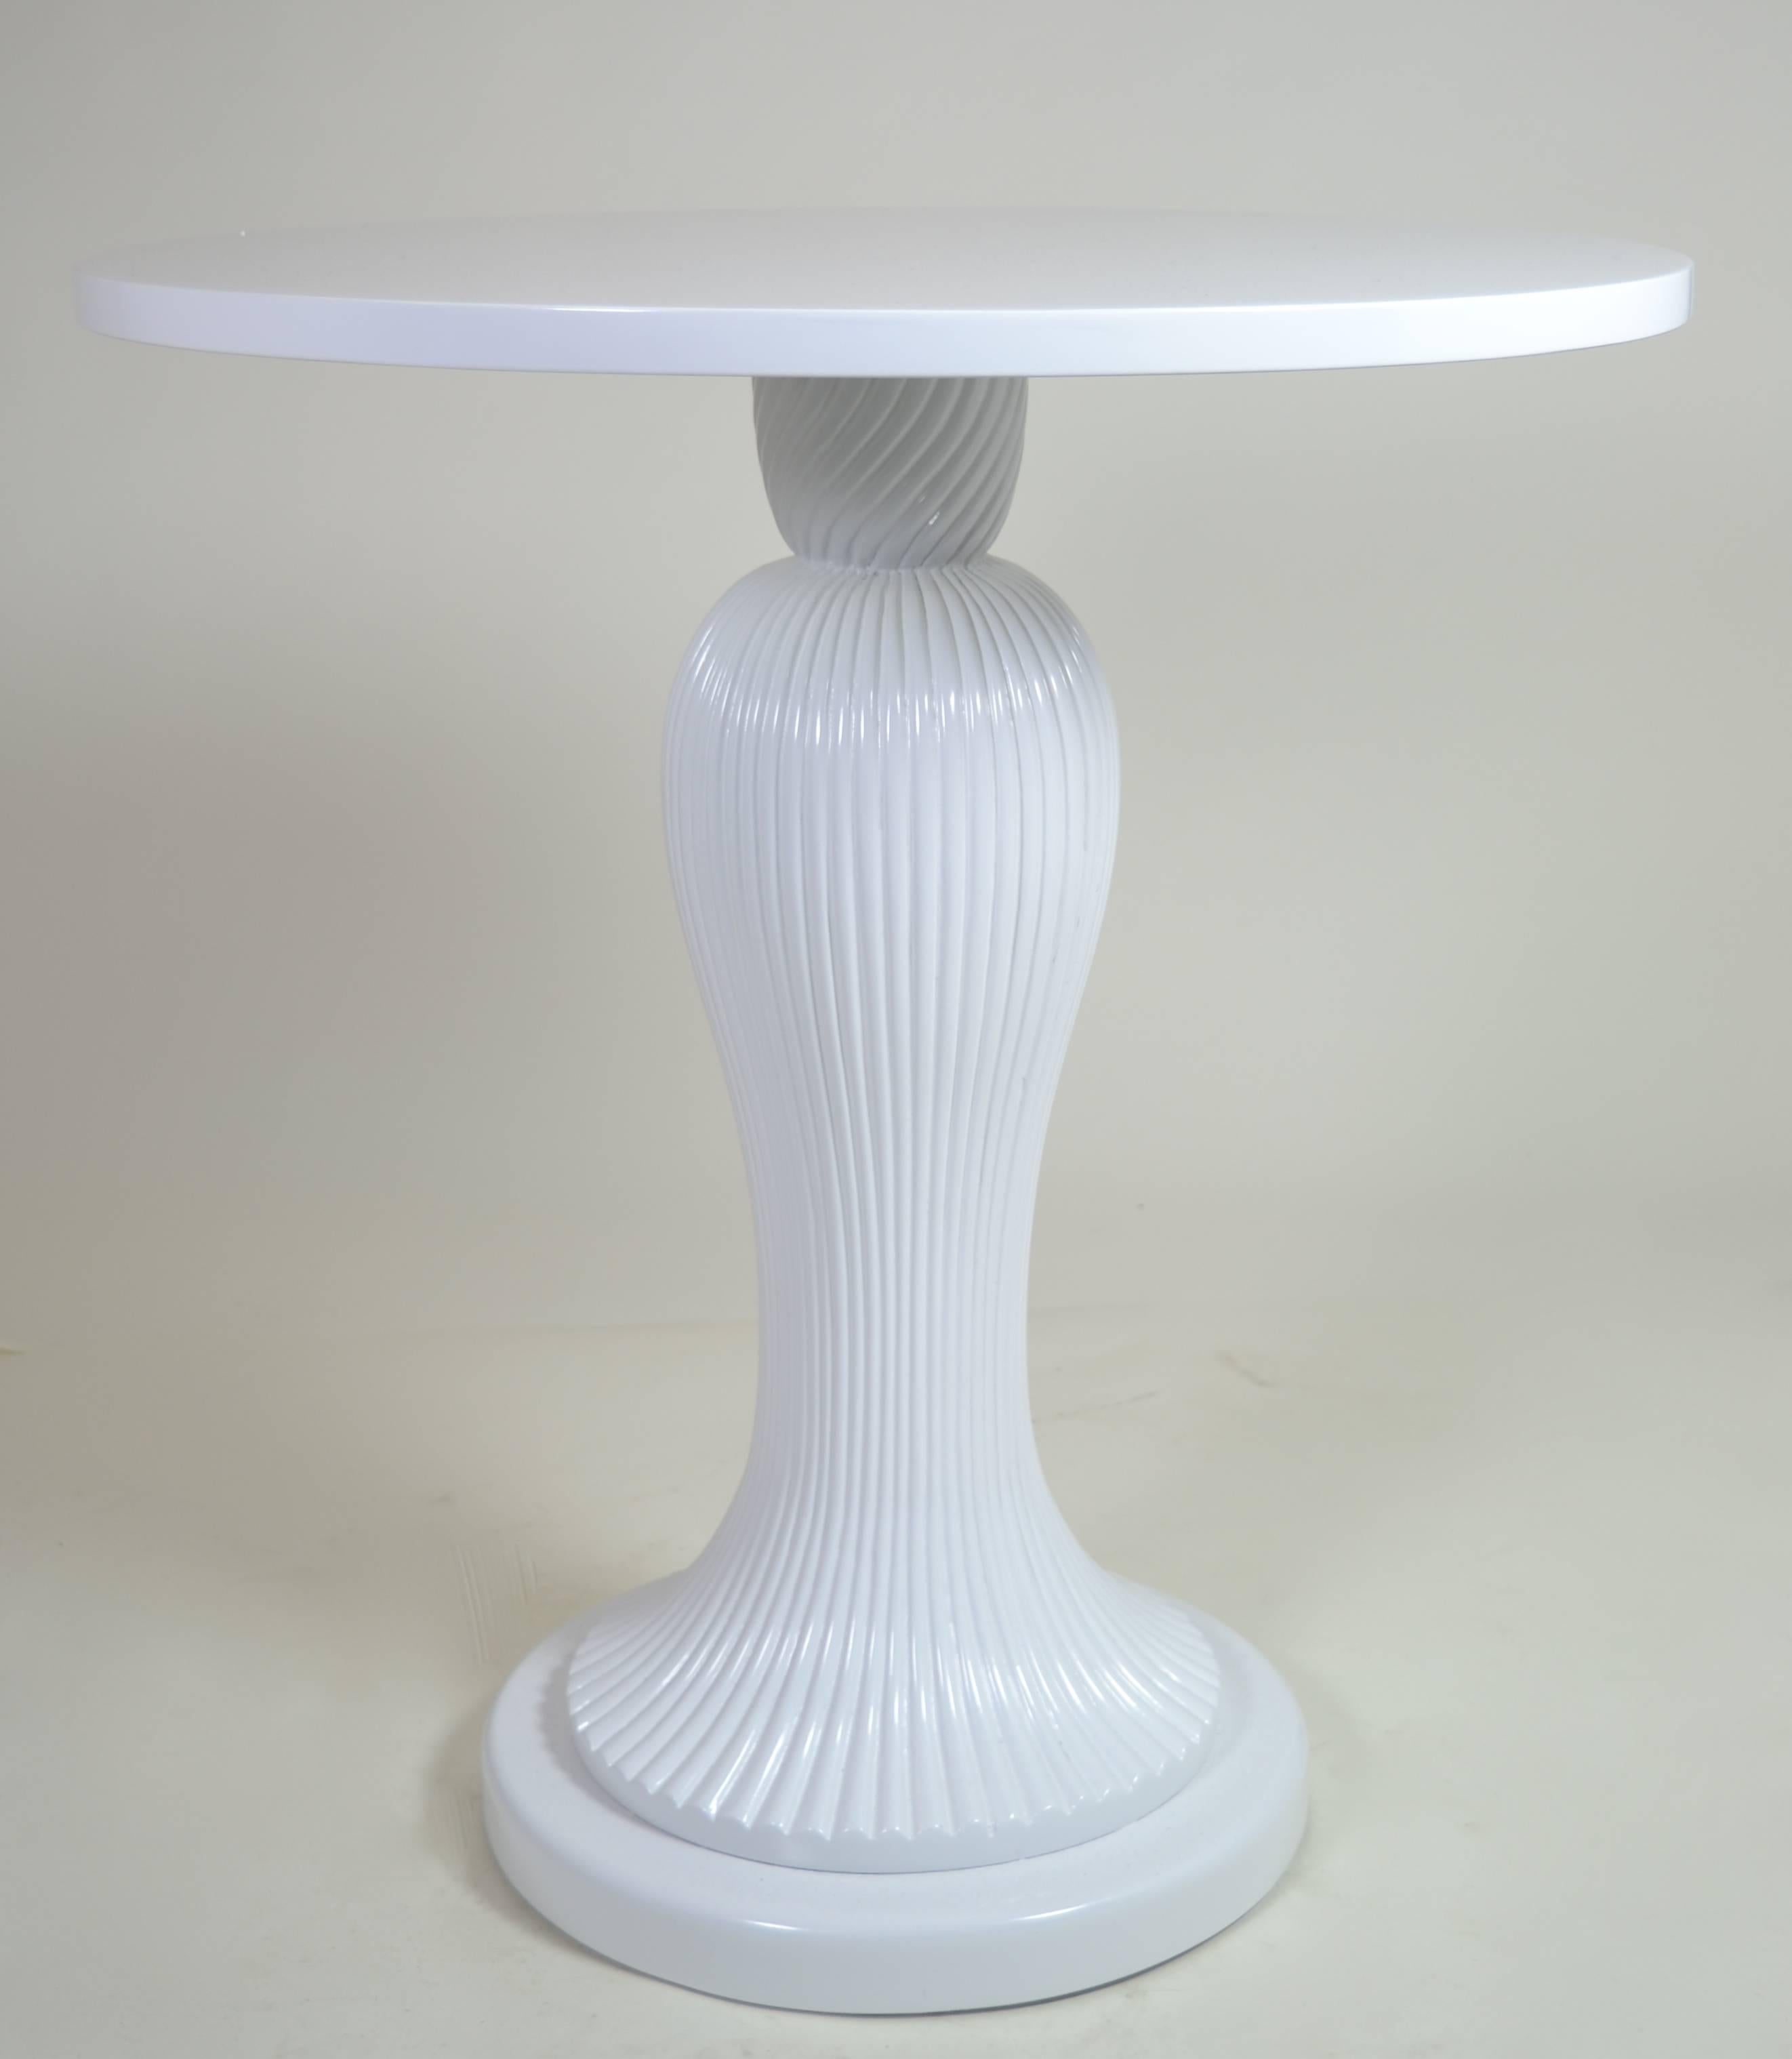 High gloss white lacquer on a simple fluted pedestal design side table or small centre table. Freshly lacquered; very, very fine condition.